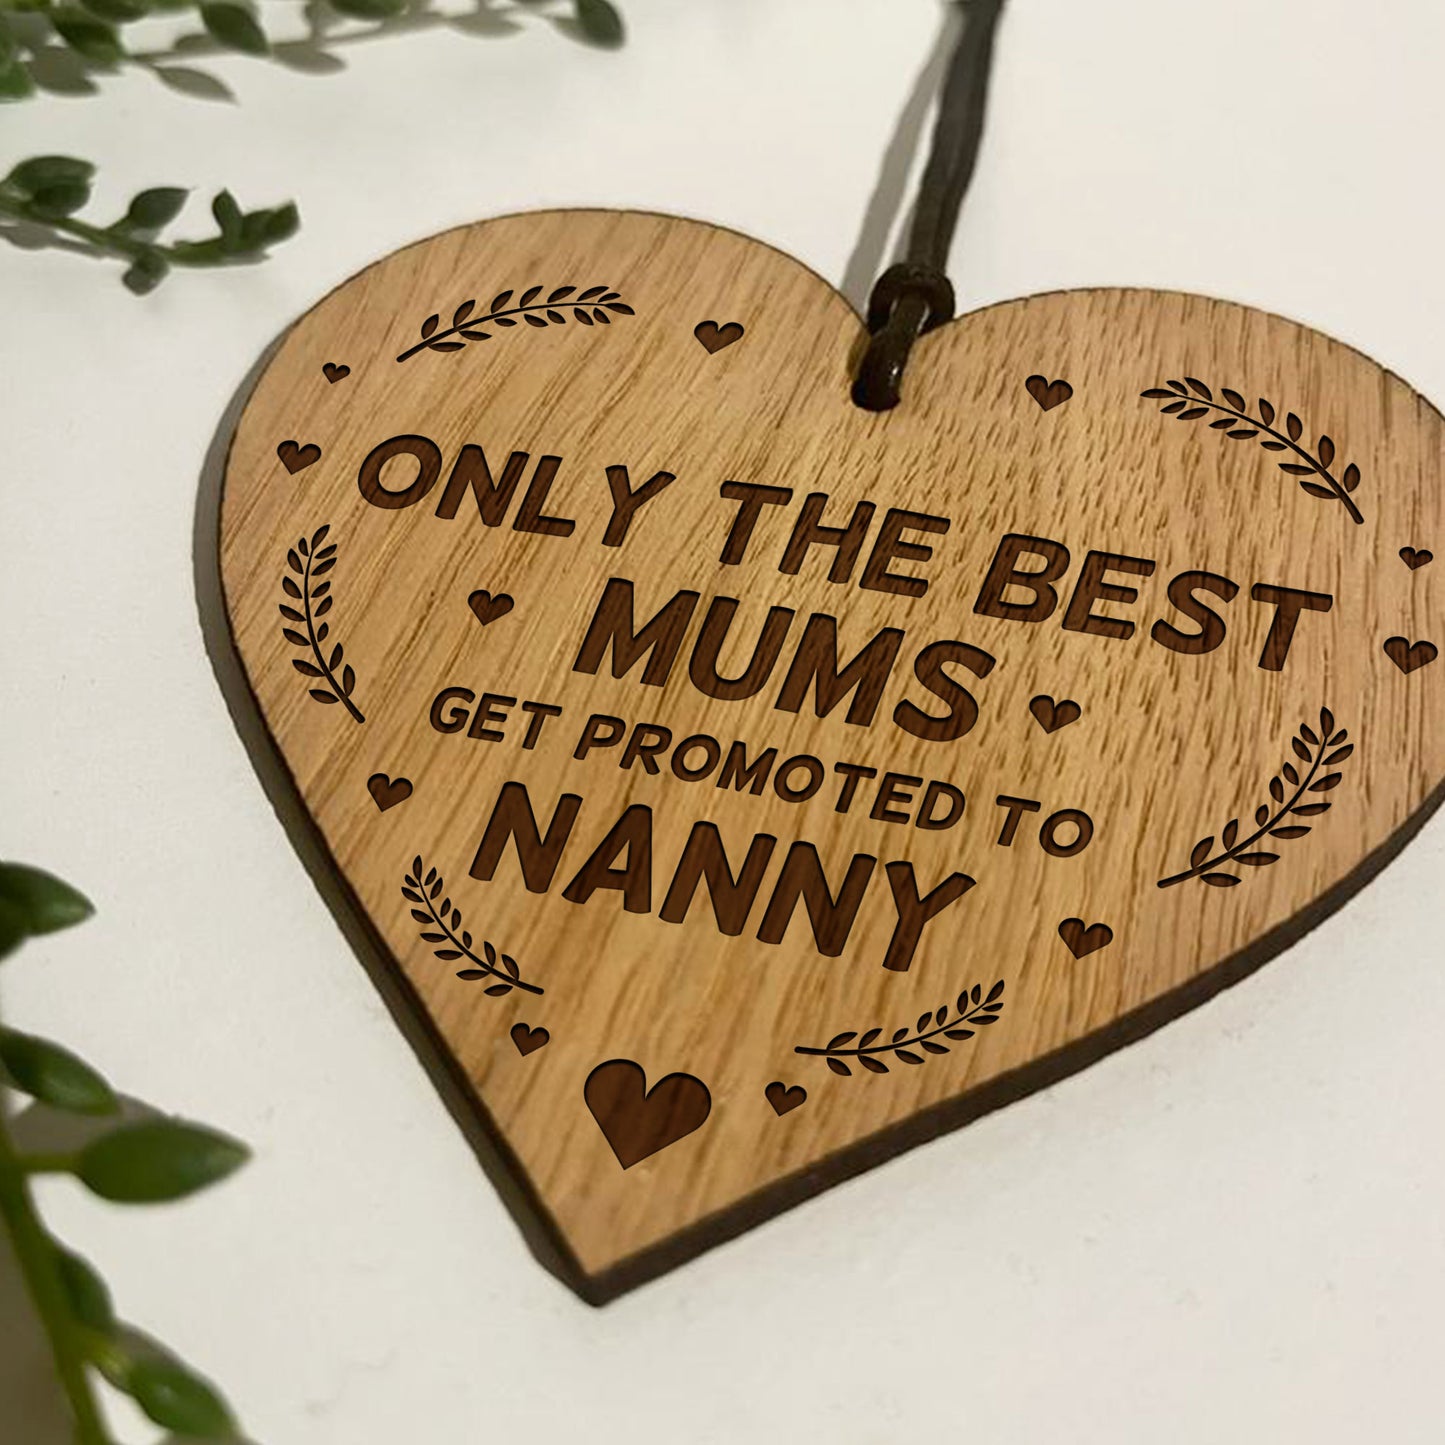 Mum Nanny Gifts Engraved Wood Heart Gift For Birthday Pregnancy